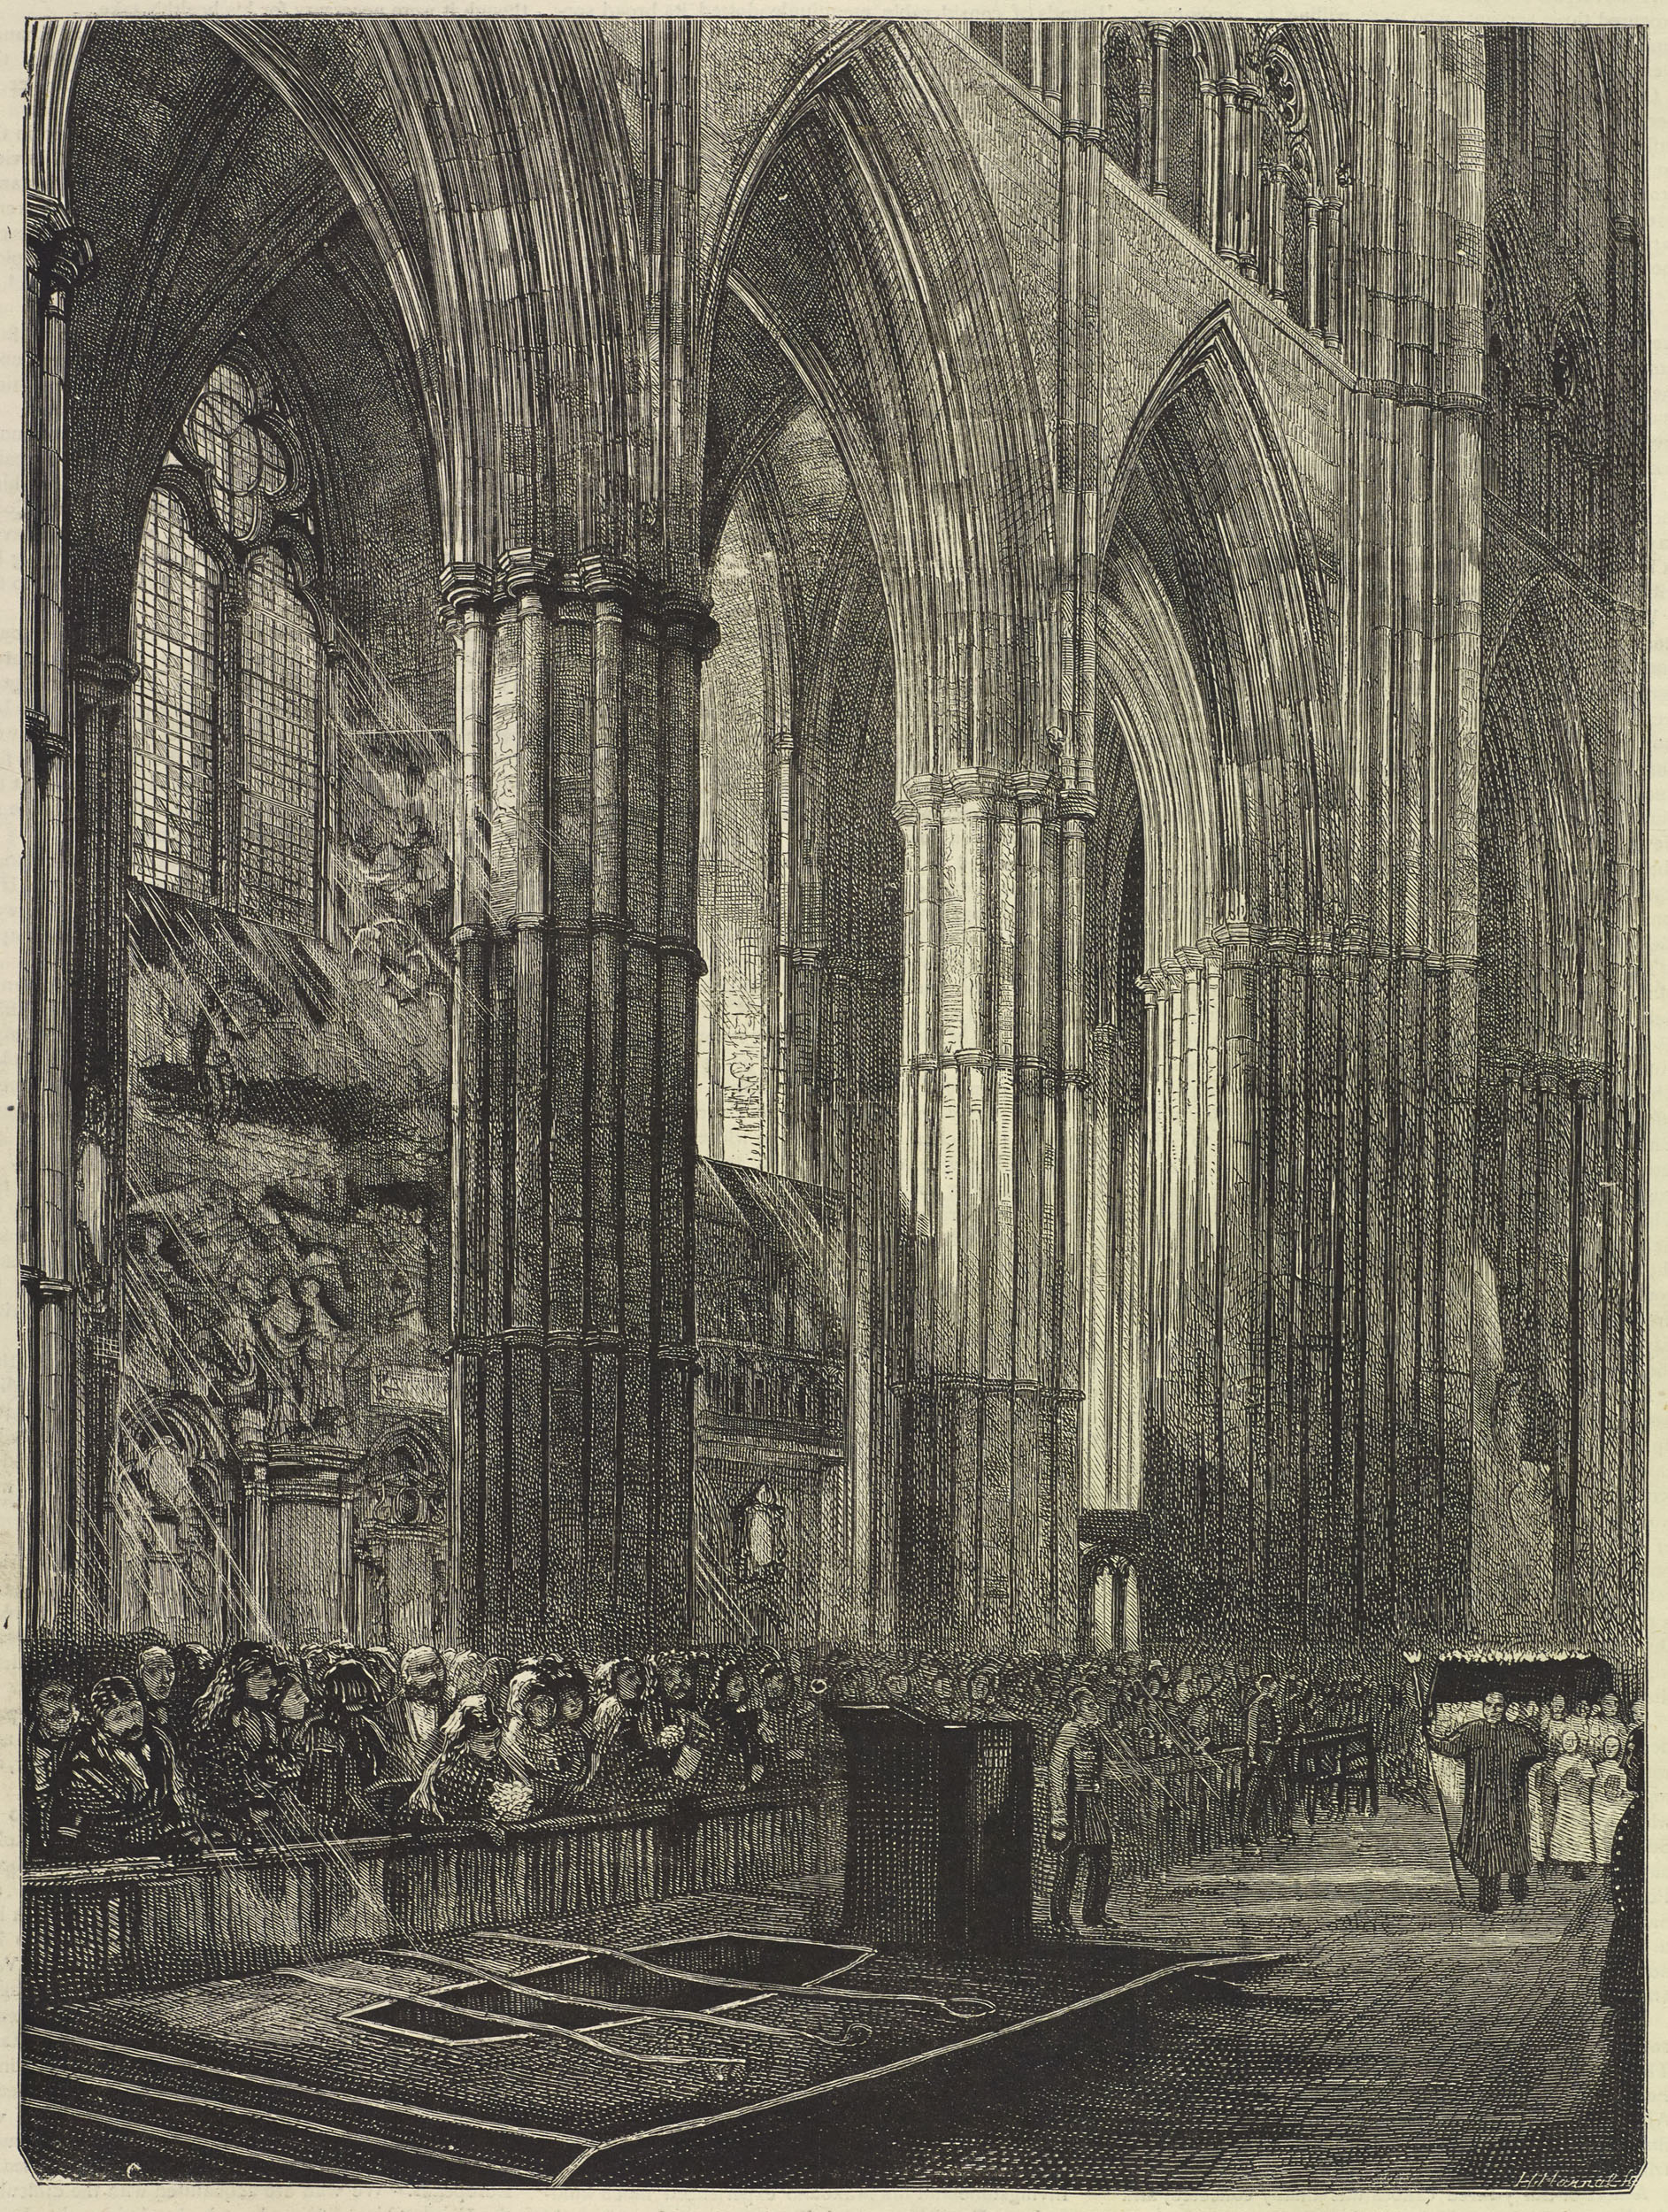 The Grave, Westminster Abbey. Illustration from Review of David Livingstone's Last Journals (Anon. 1874:400). Copyright National Library of Scotland. Creative Commons Share-alike 2.5 UK: Scotland (https://creativecommons.org/licenses/by-nc-sa/2.5/scotland/).